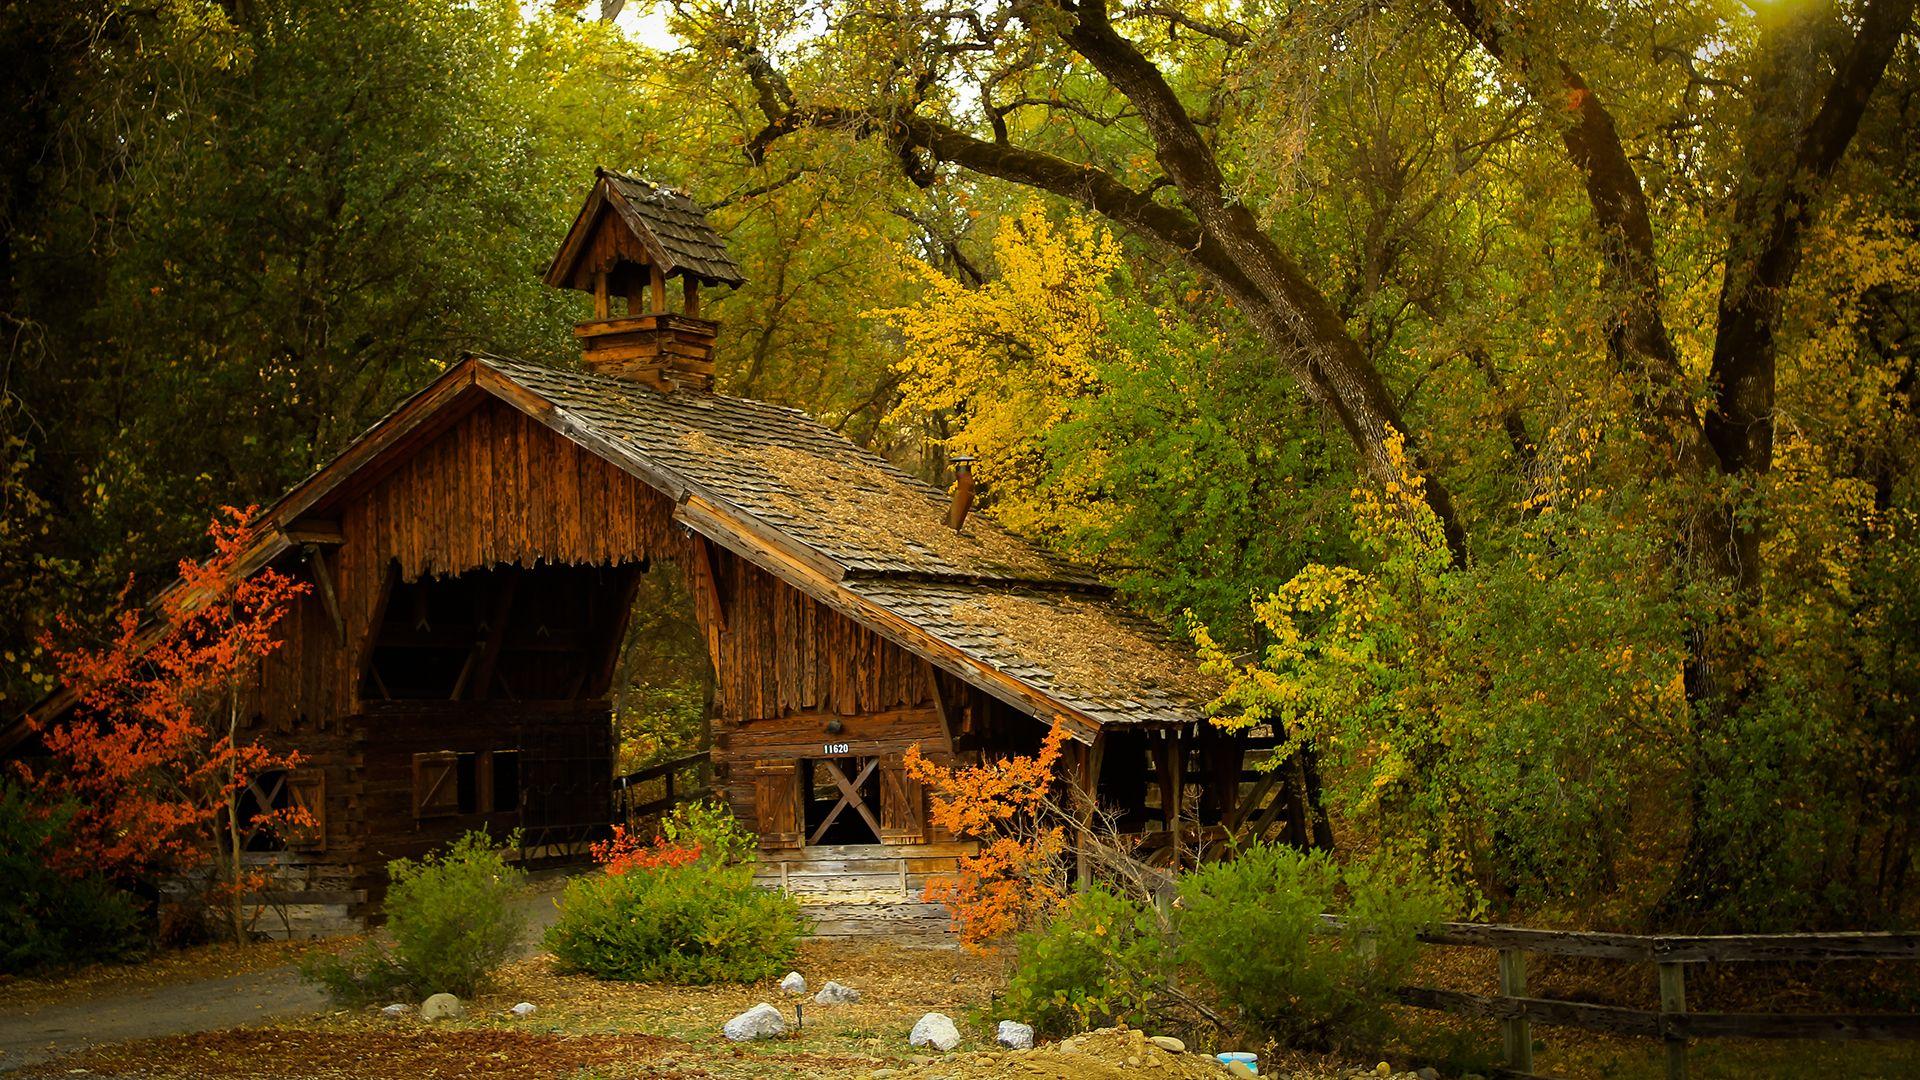 Cabin in the Woods Wallpapers - Top Free Cabin in the Woods Backgrounds